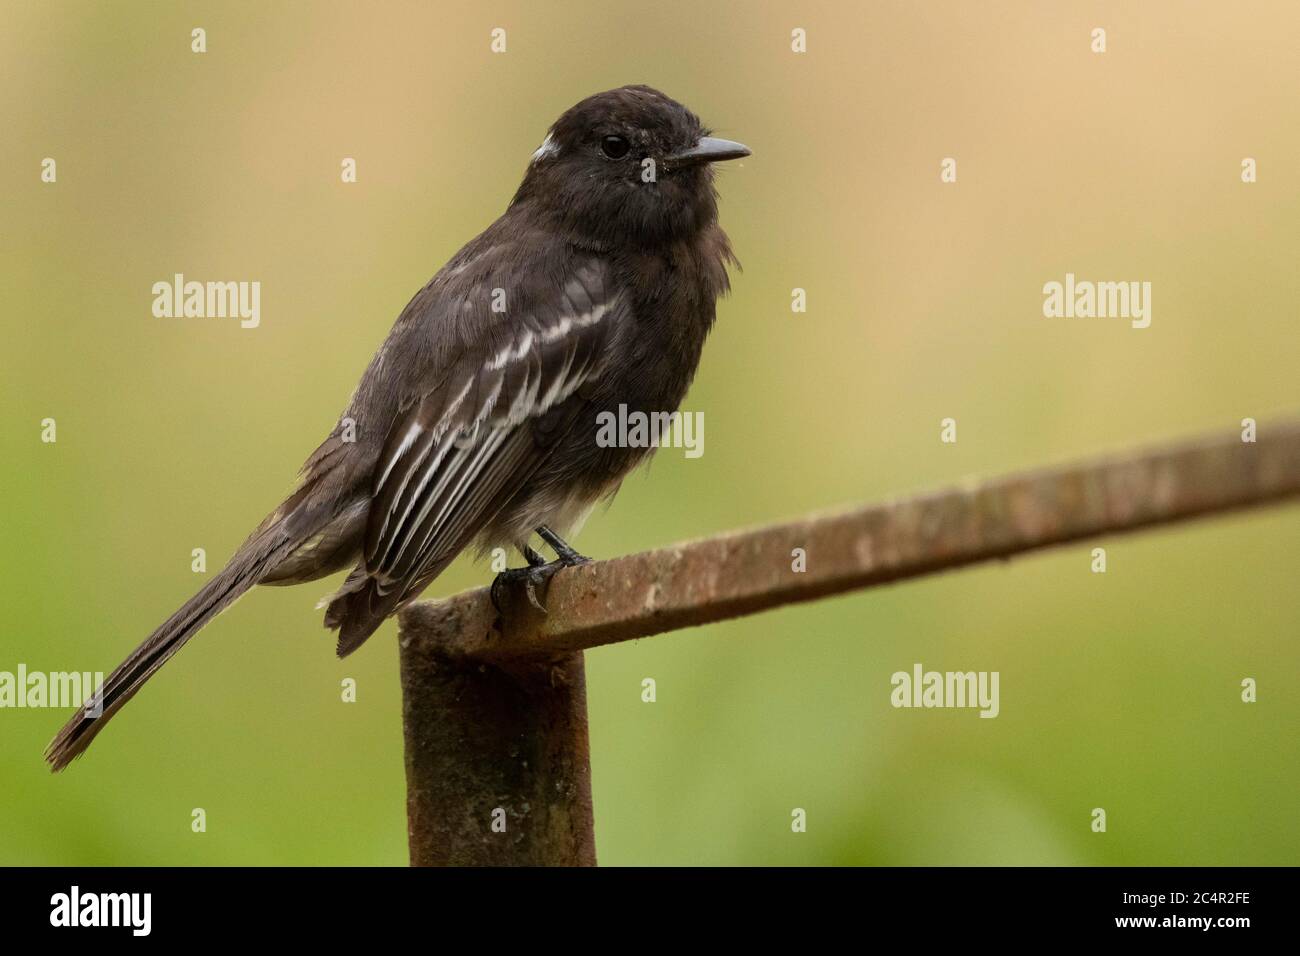 A black phoebe (Sayornis nigricans) perched in a metal piece Stock Photo